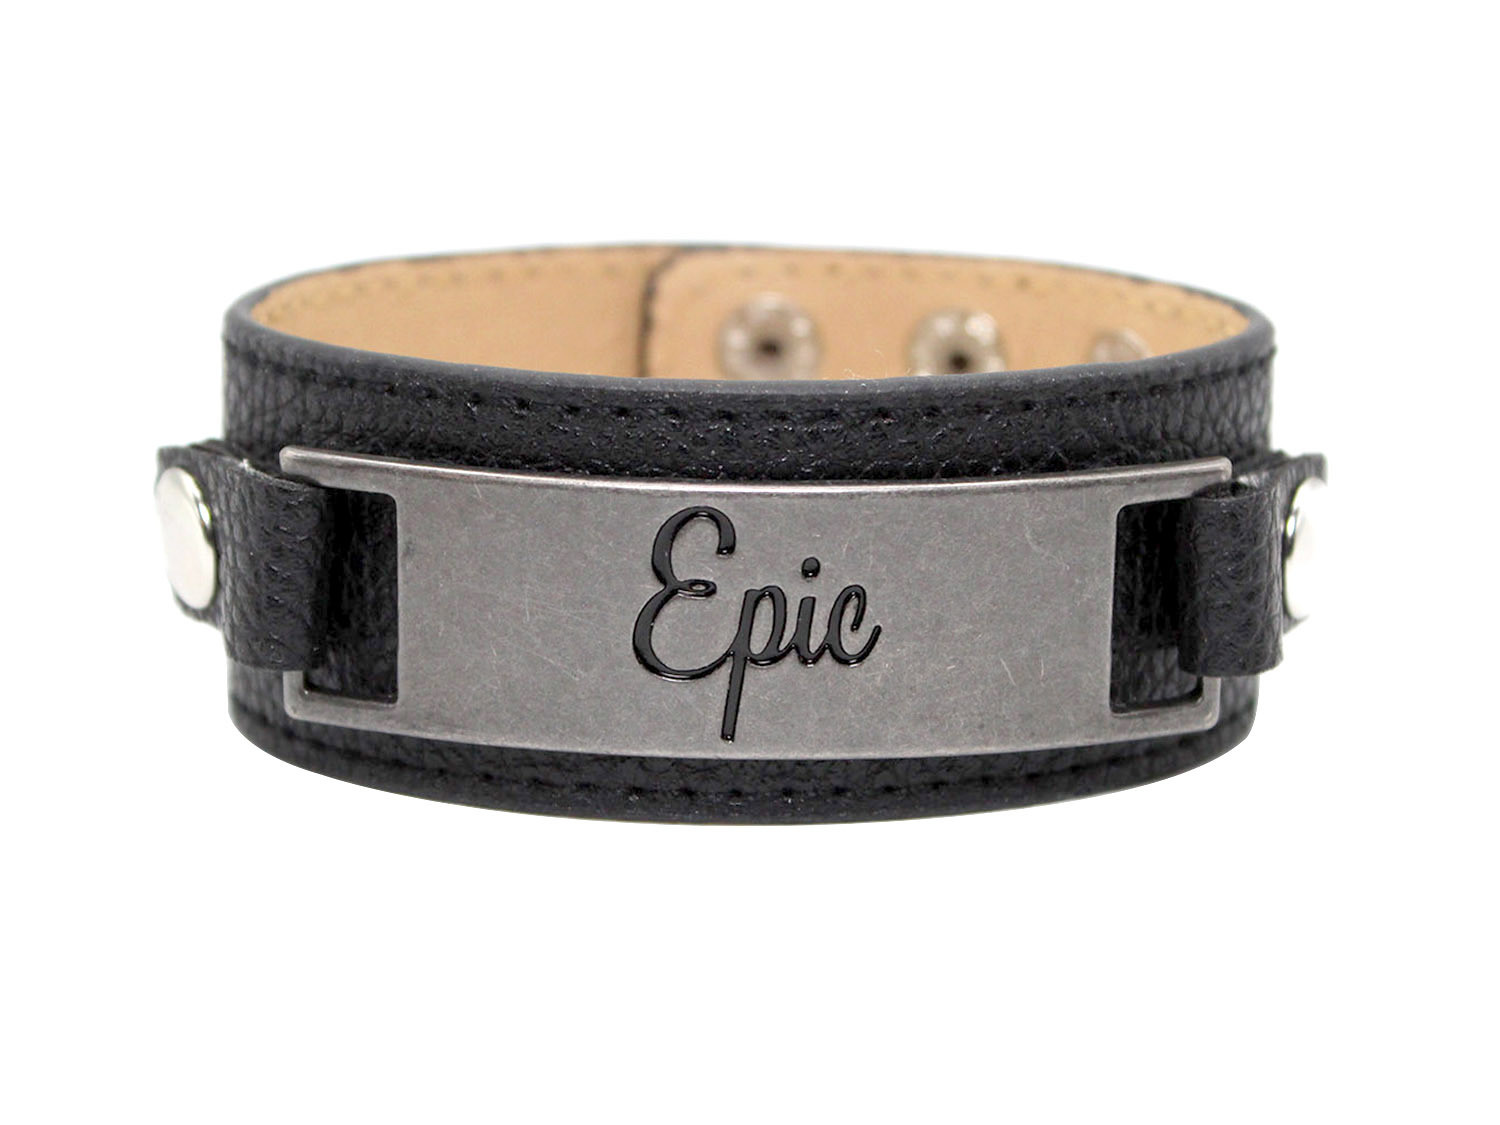 Classic Cuff with Metal Plaque "Epic"